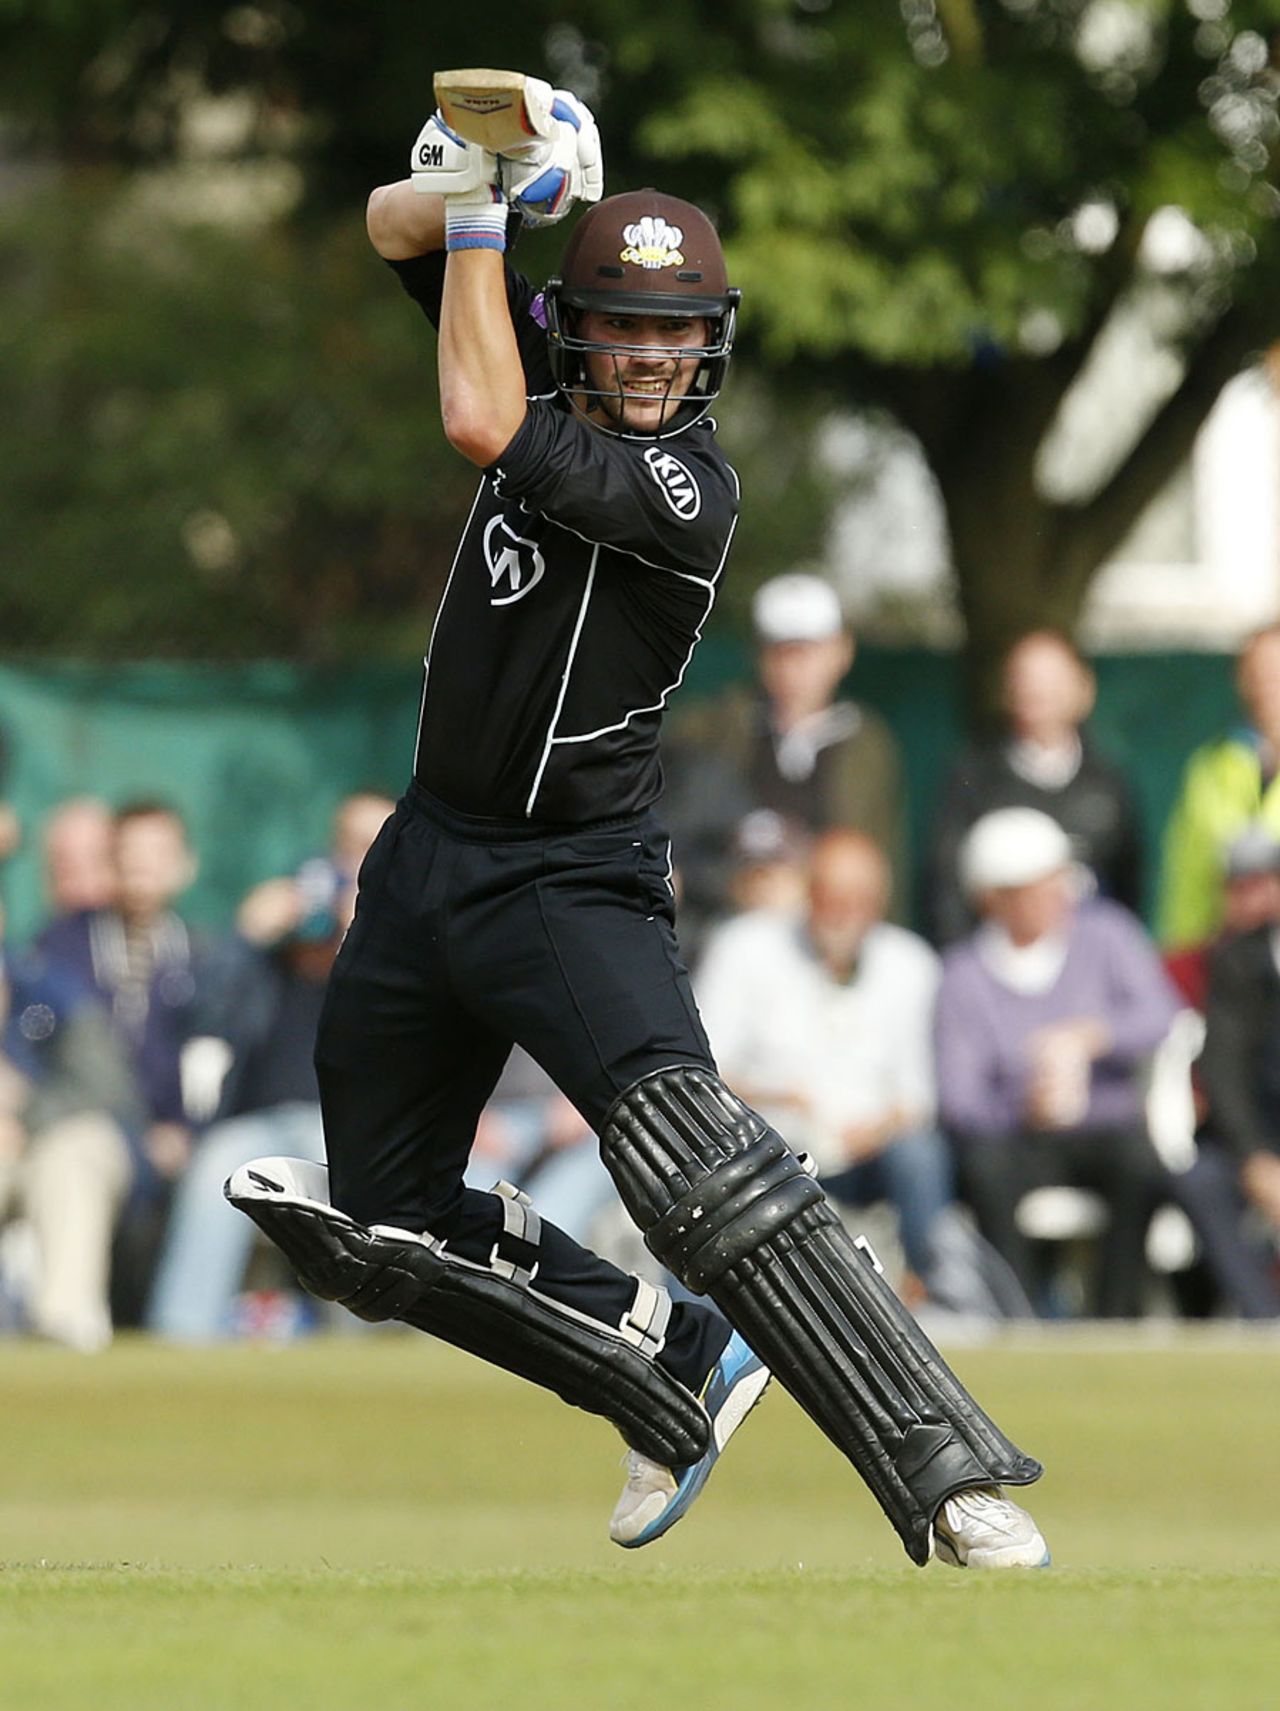 Rory Burns eases the ball through the off side, Surrey v Sussex, Royal London Cup, South Group, June 14, 2016